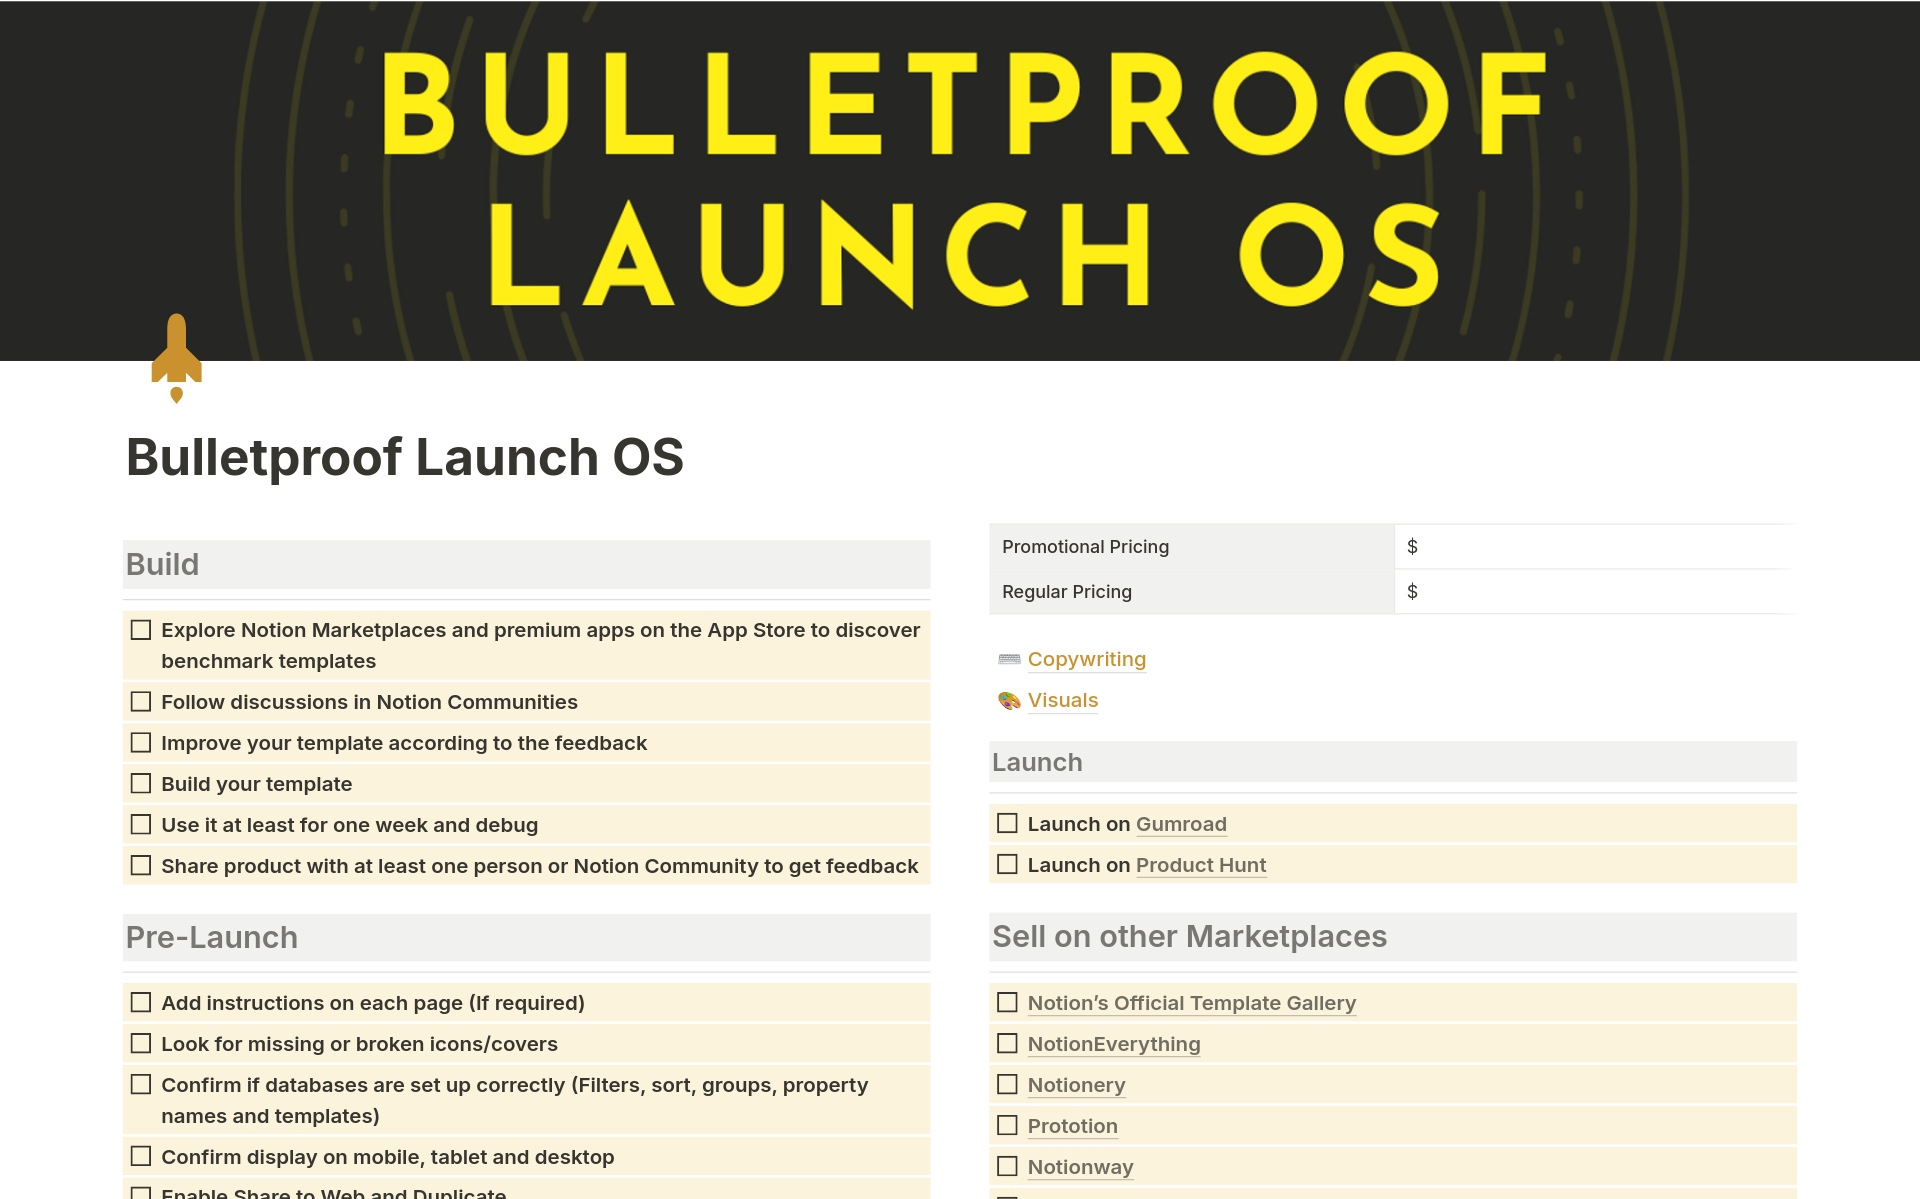 Introducing "Bulletproof Launch OS" – Your All-In-One Launch Success Solution!